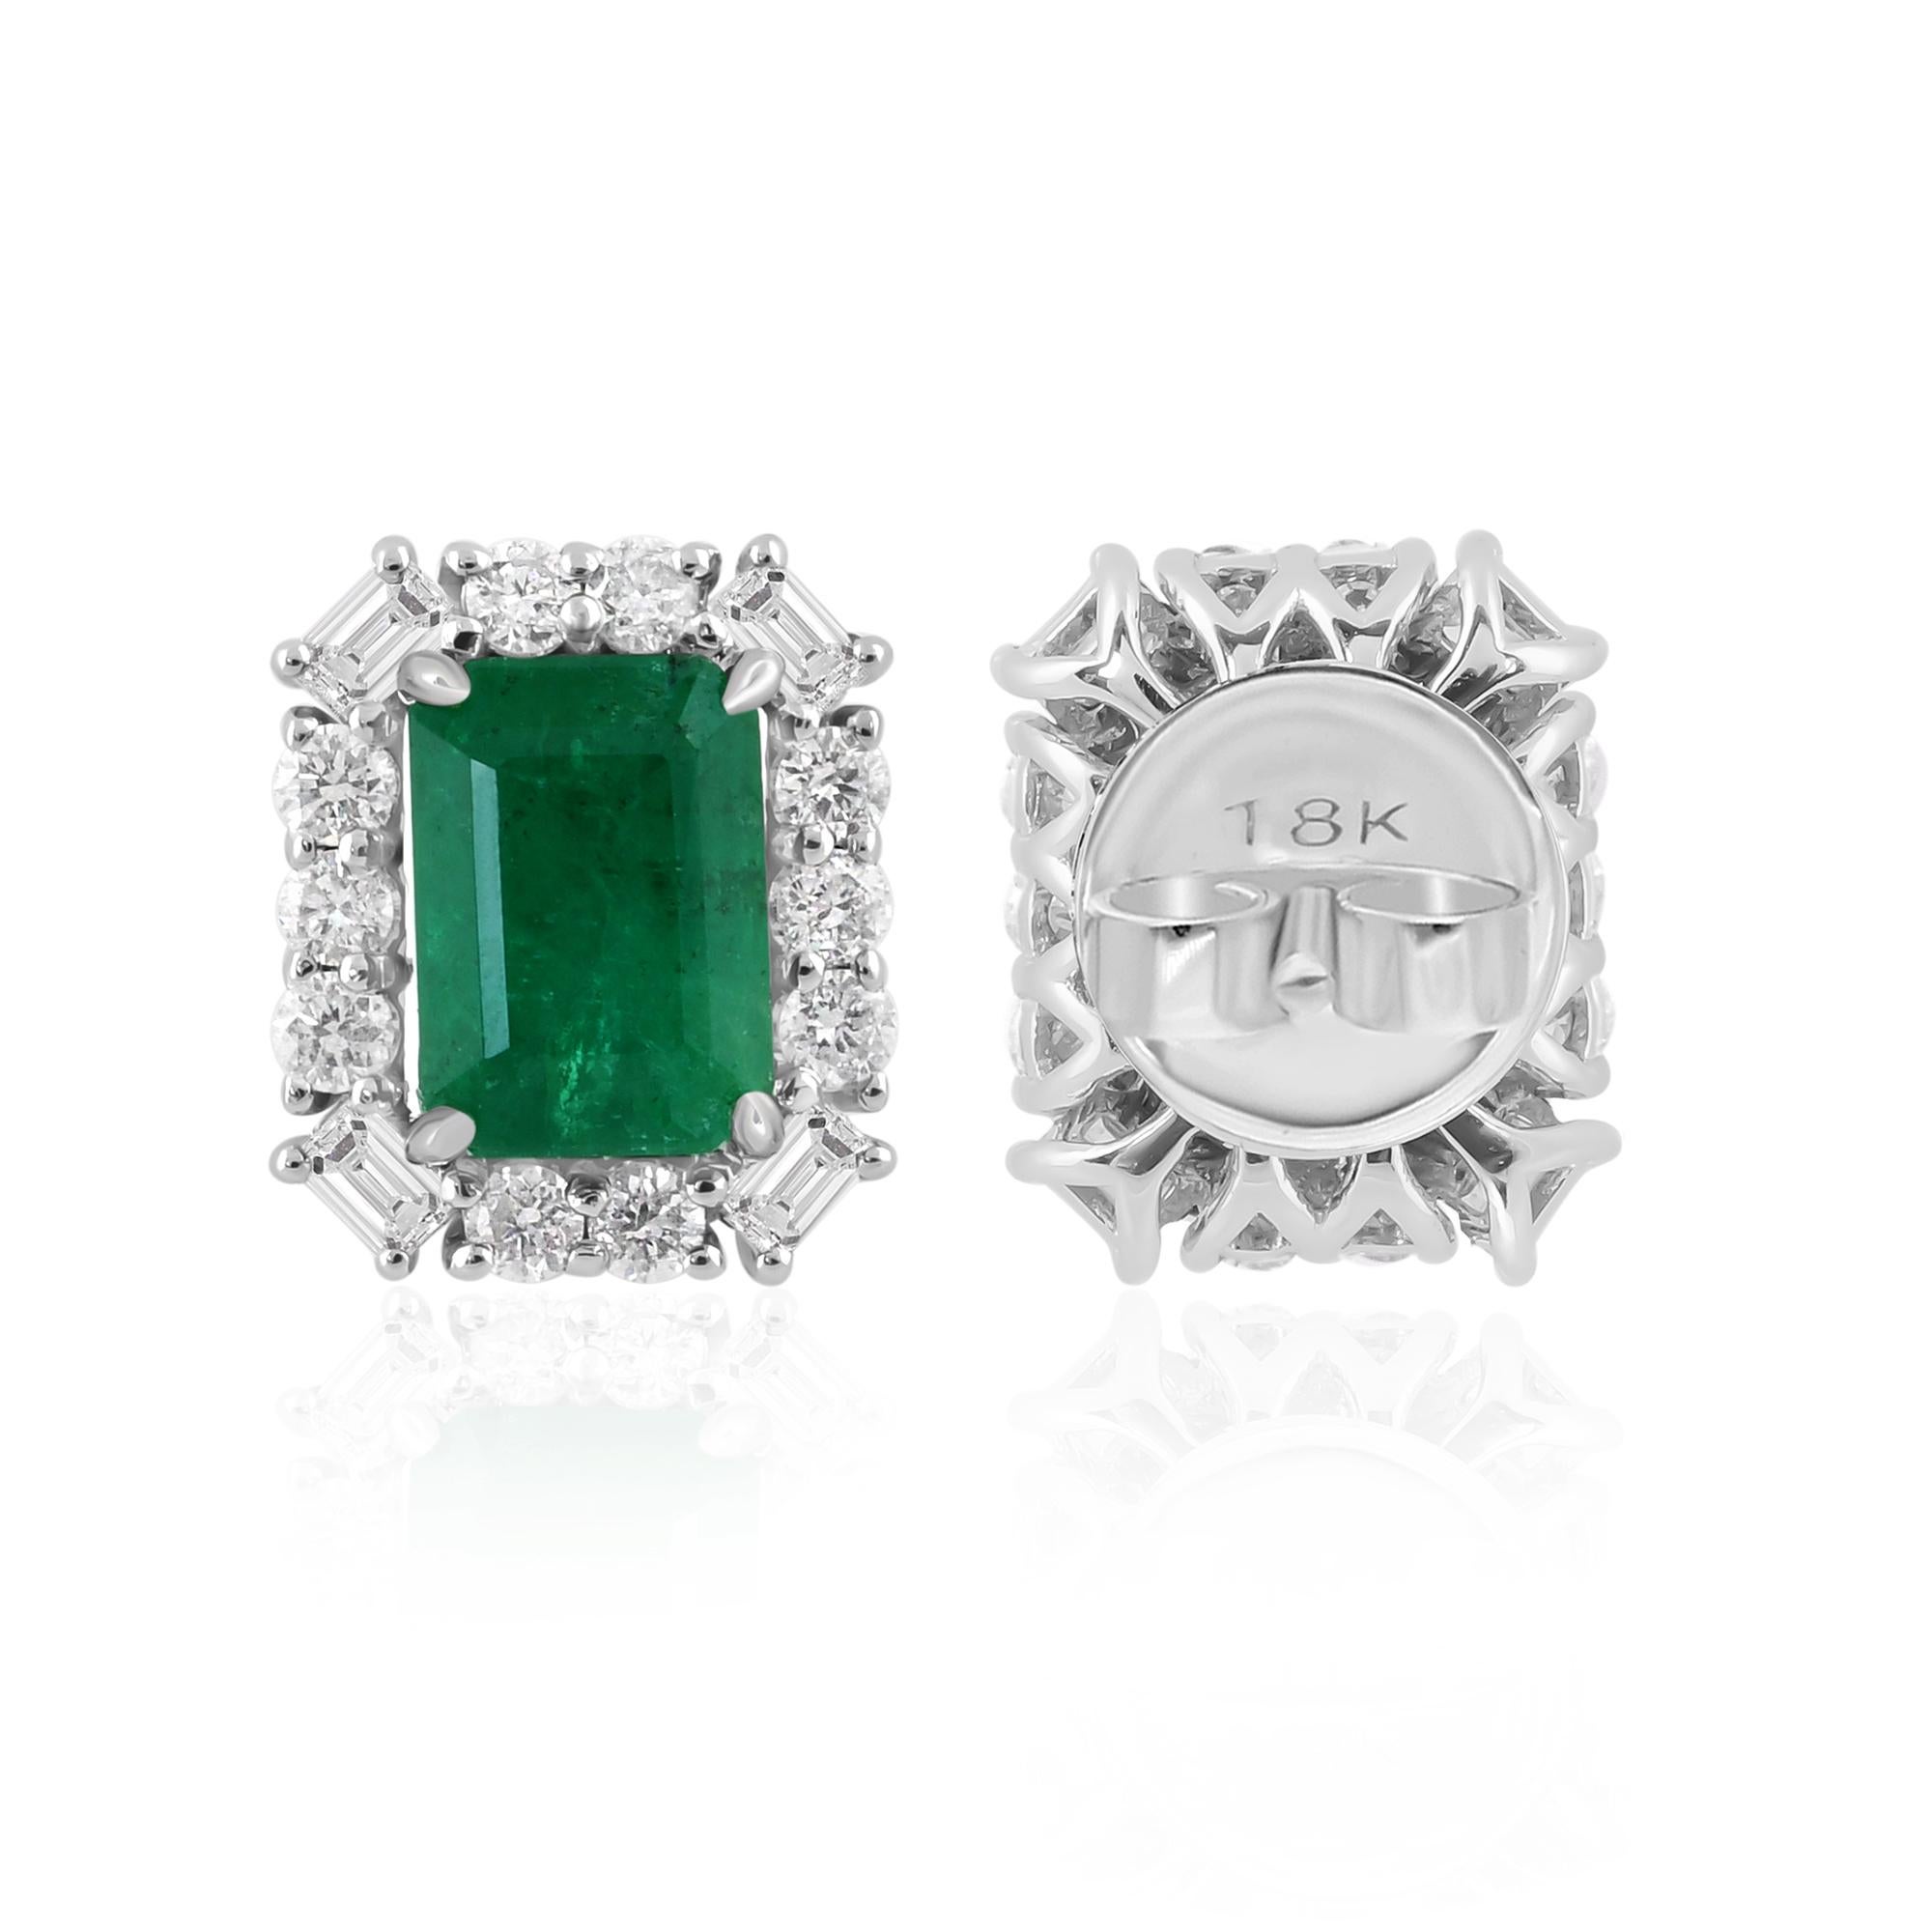 Step into a world of enchantment with these Zambian Emerald Gemstone Earrings, a masterpiece of handmade jewelry crafted in elegant 14 Karat White Gold. Radiating sophistication and allure, these earrings feature exquisite Zambian emeralds accented